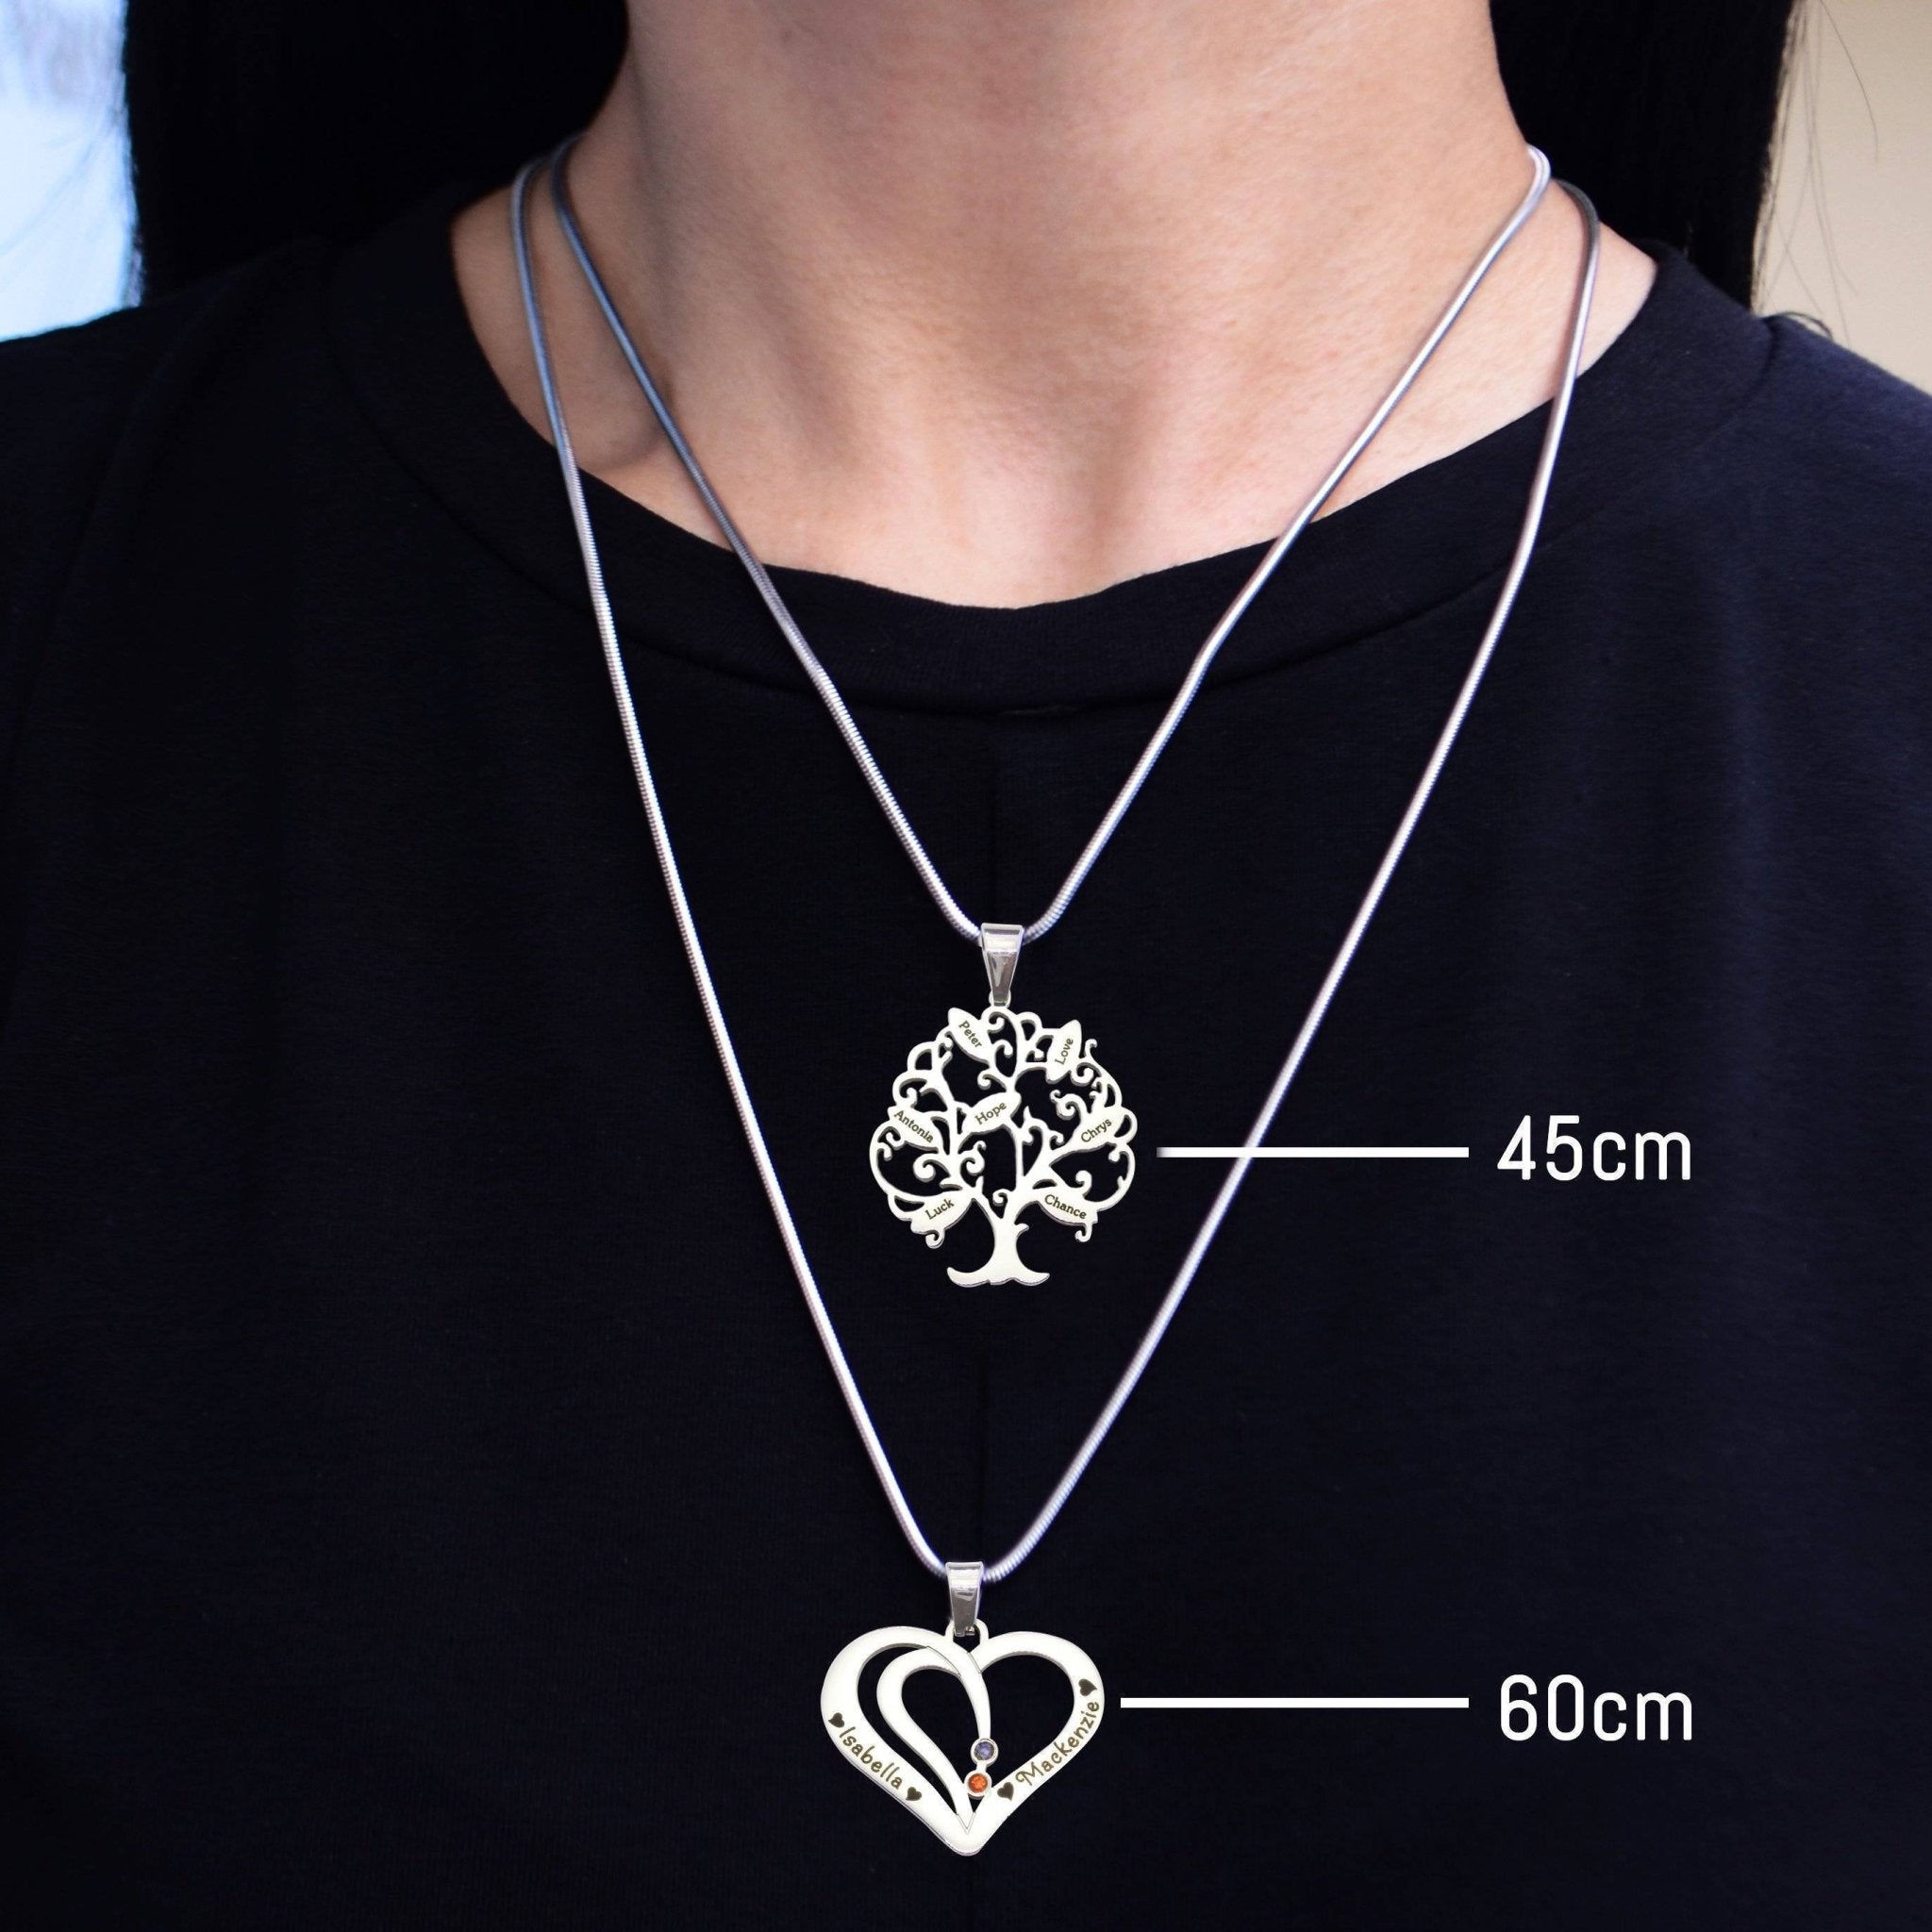 Family Triple Love Necklace - Family Tree Necklaces by Belle Fever